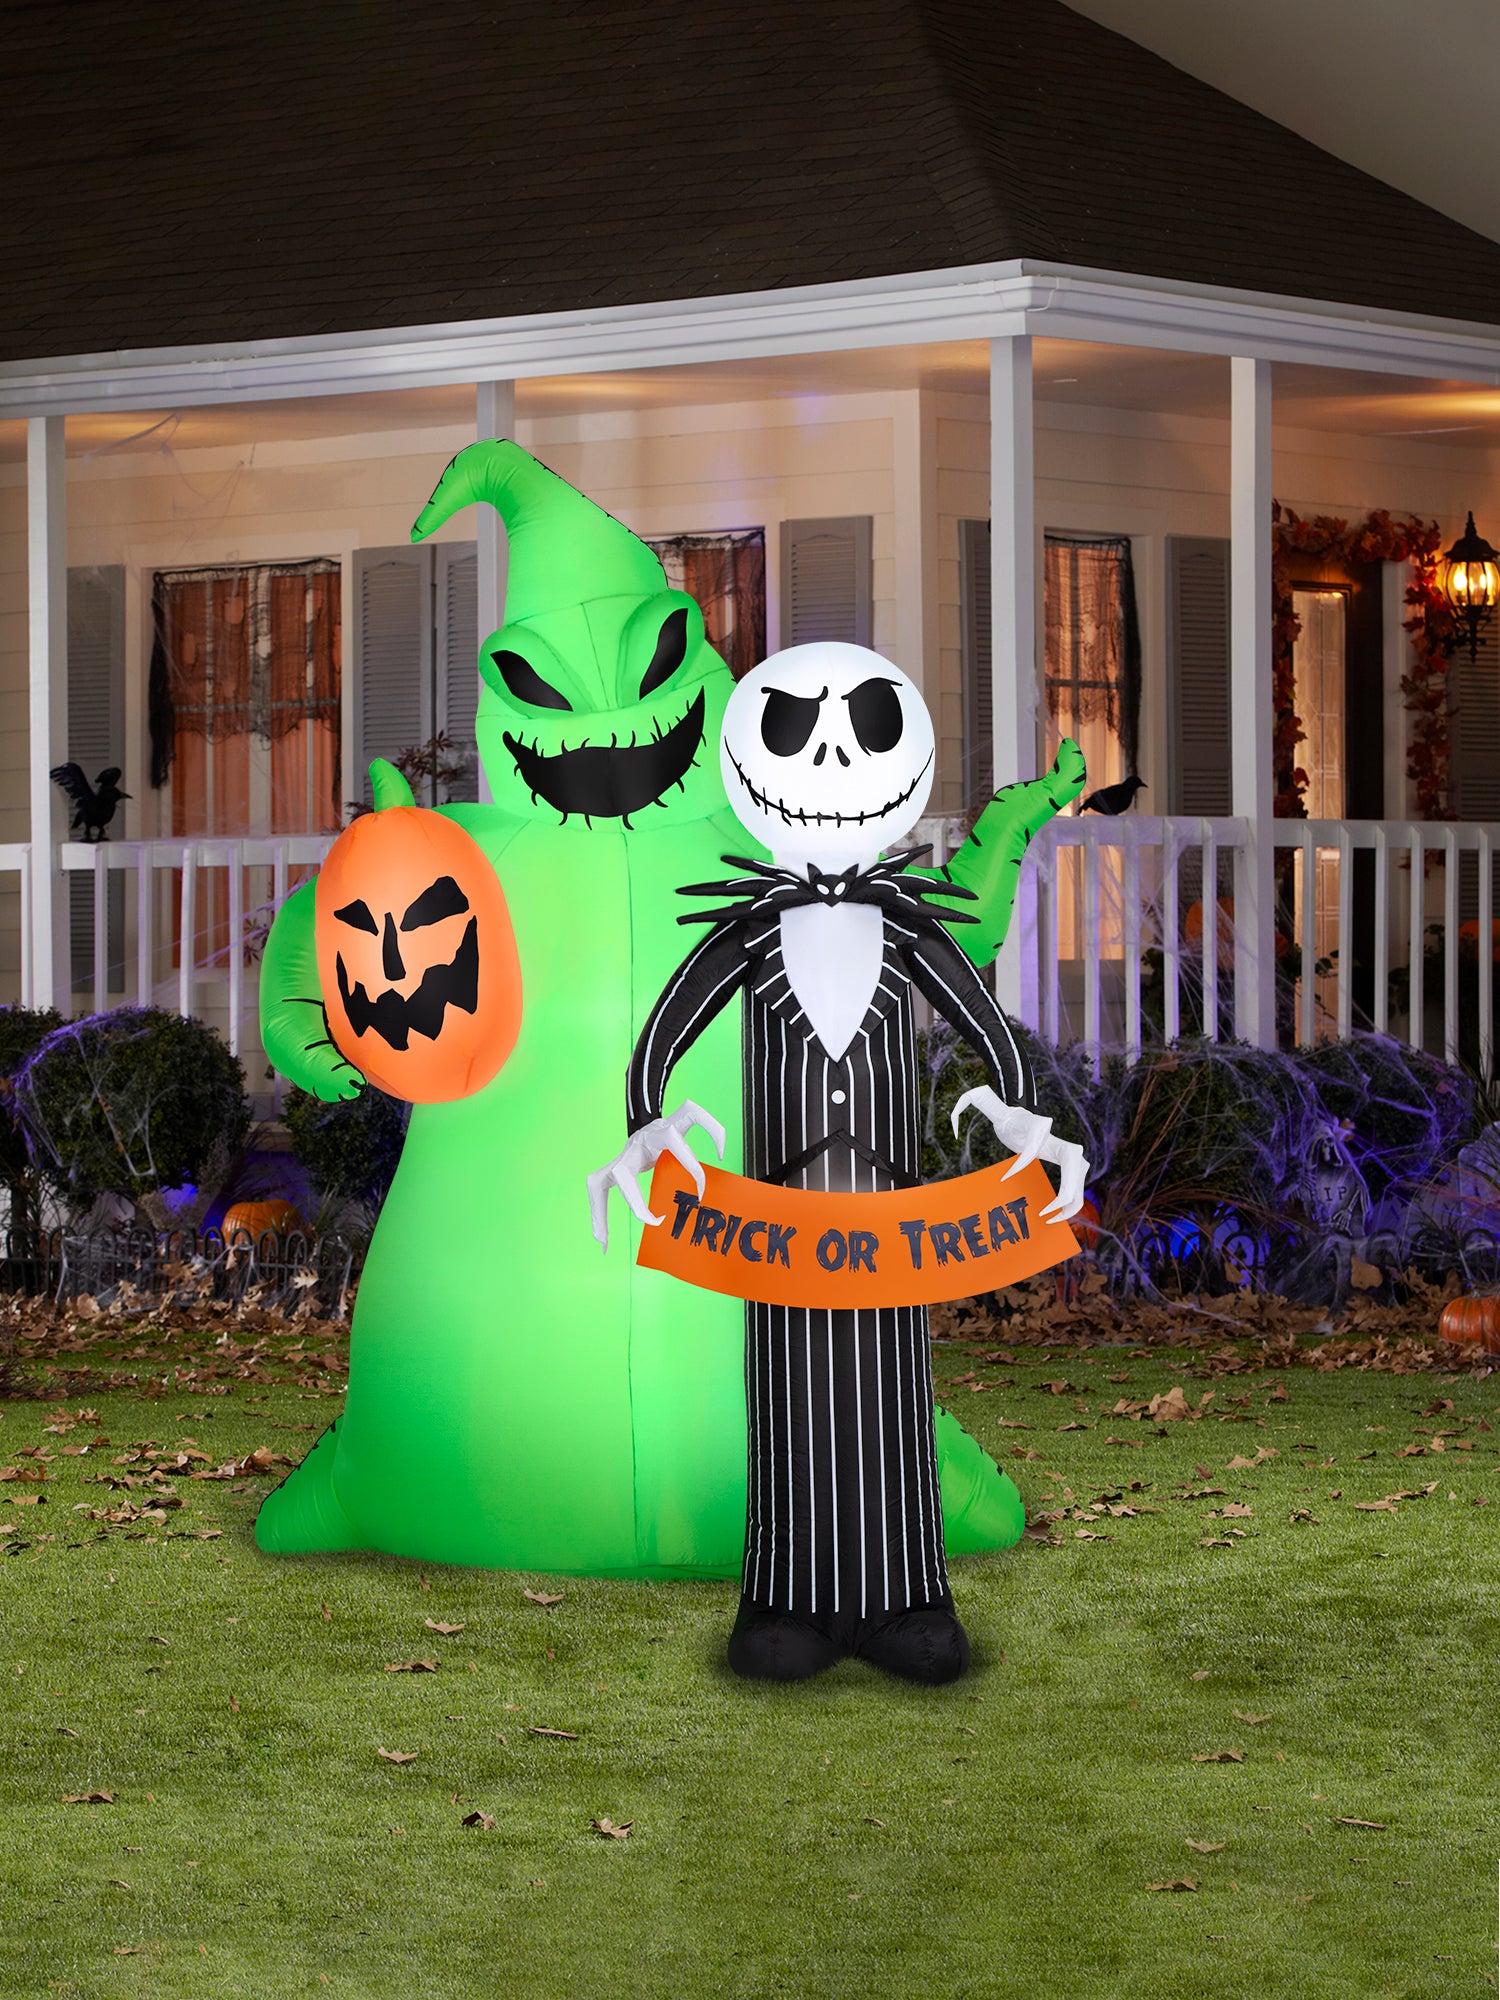 6.5 Foot The Nightmare Before Christmas Jack Skellington & Oogie Boogie Light Up Halloween Inflatable Lawn Decor - costumes.com